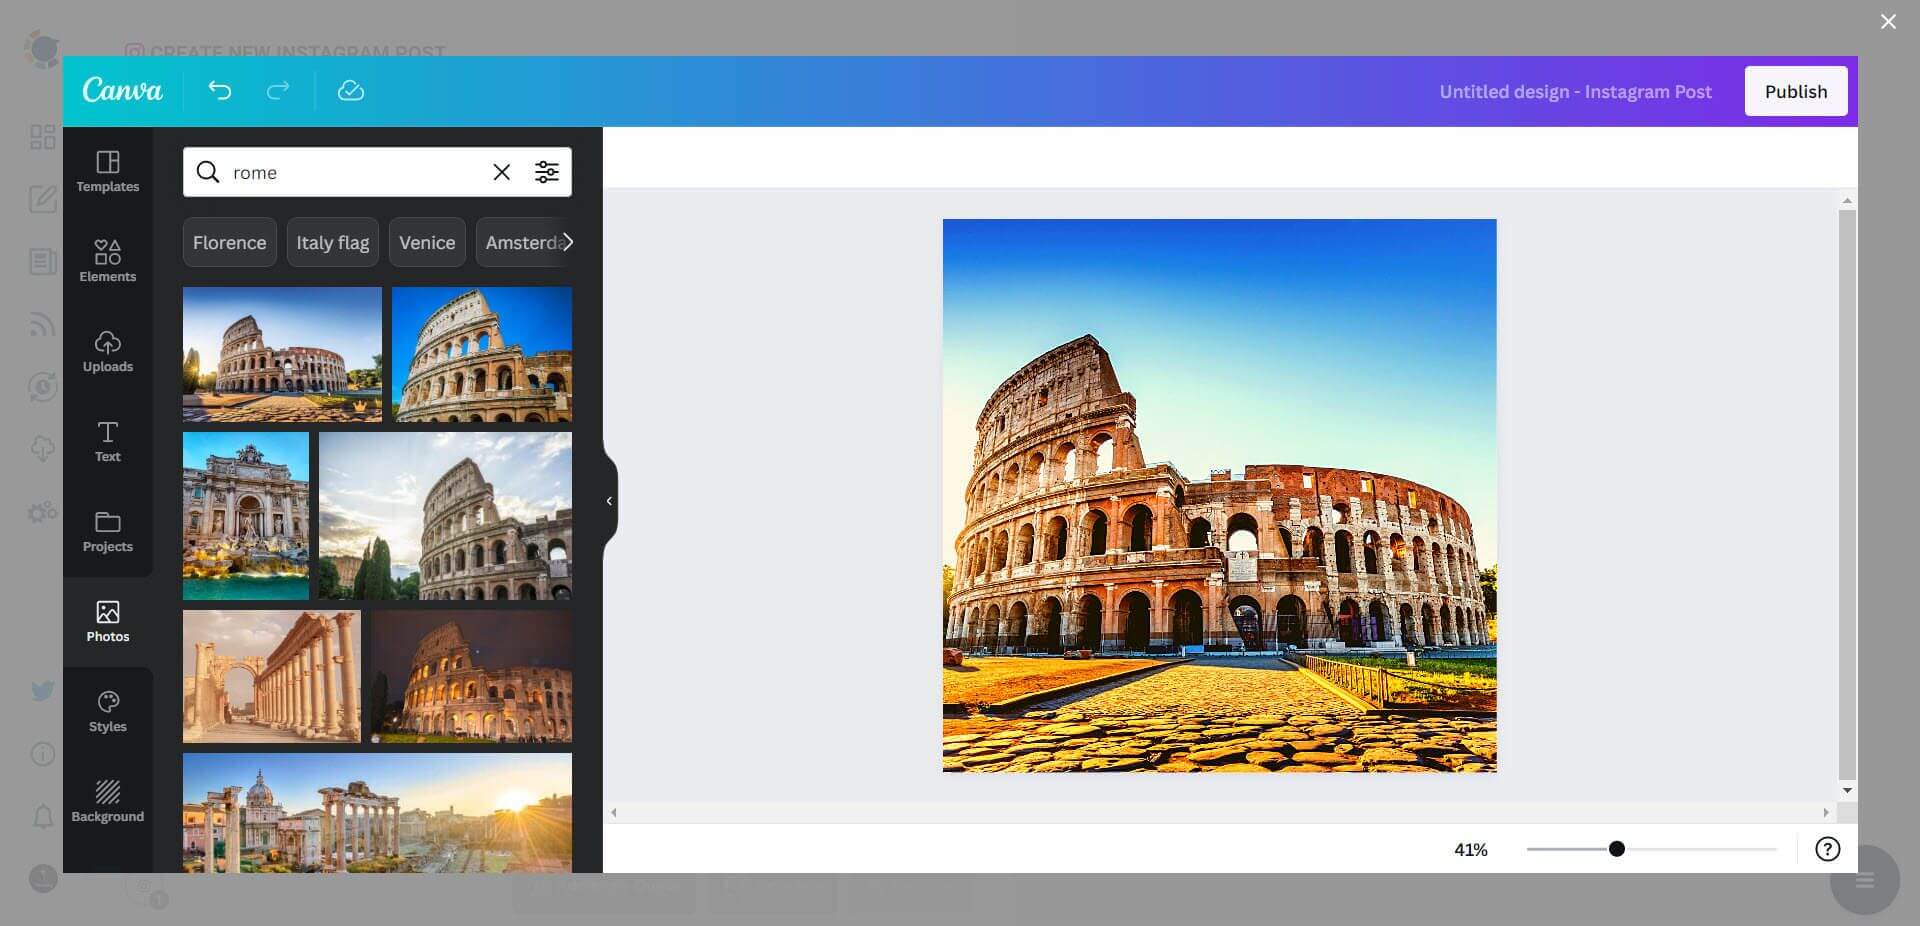 With Circleboom Publish, you can also design your content with the built-in Canva tool